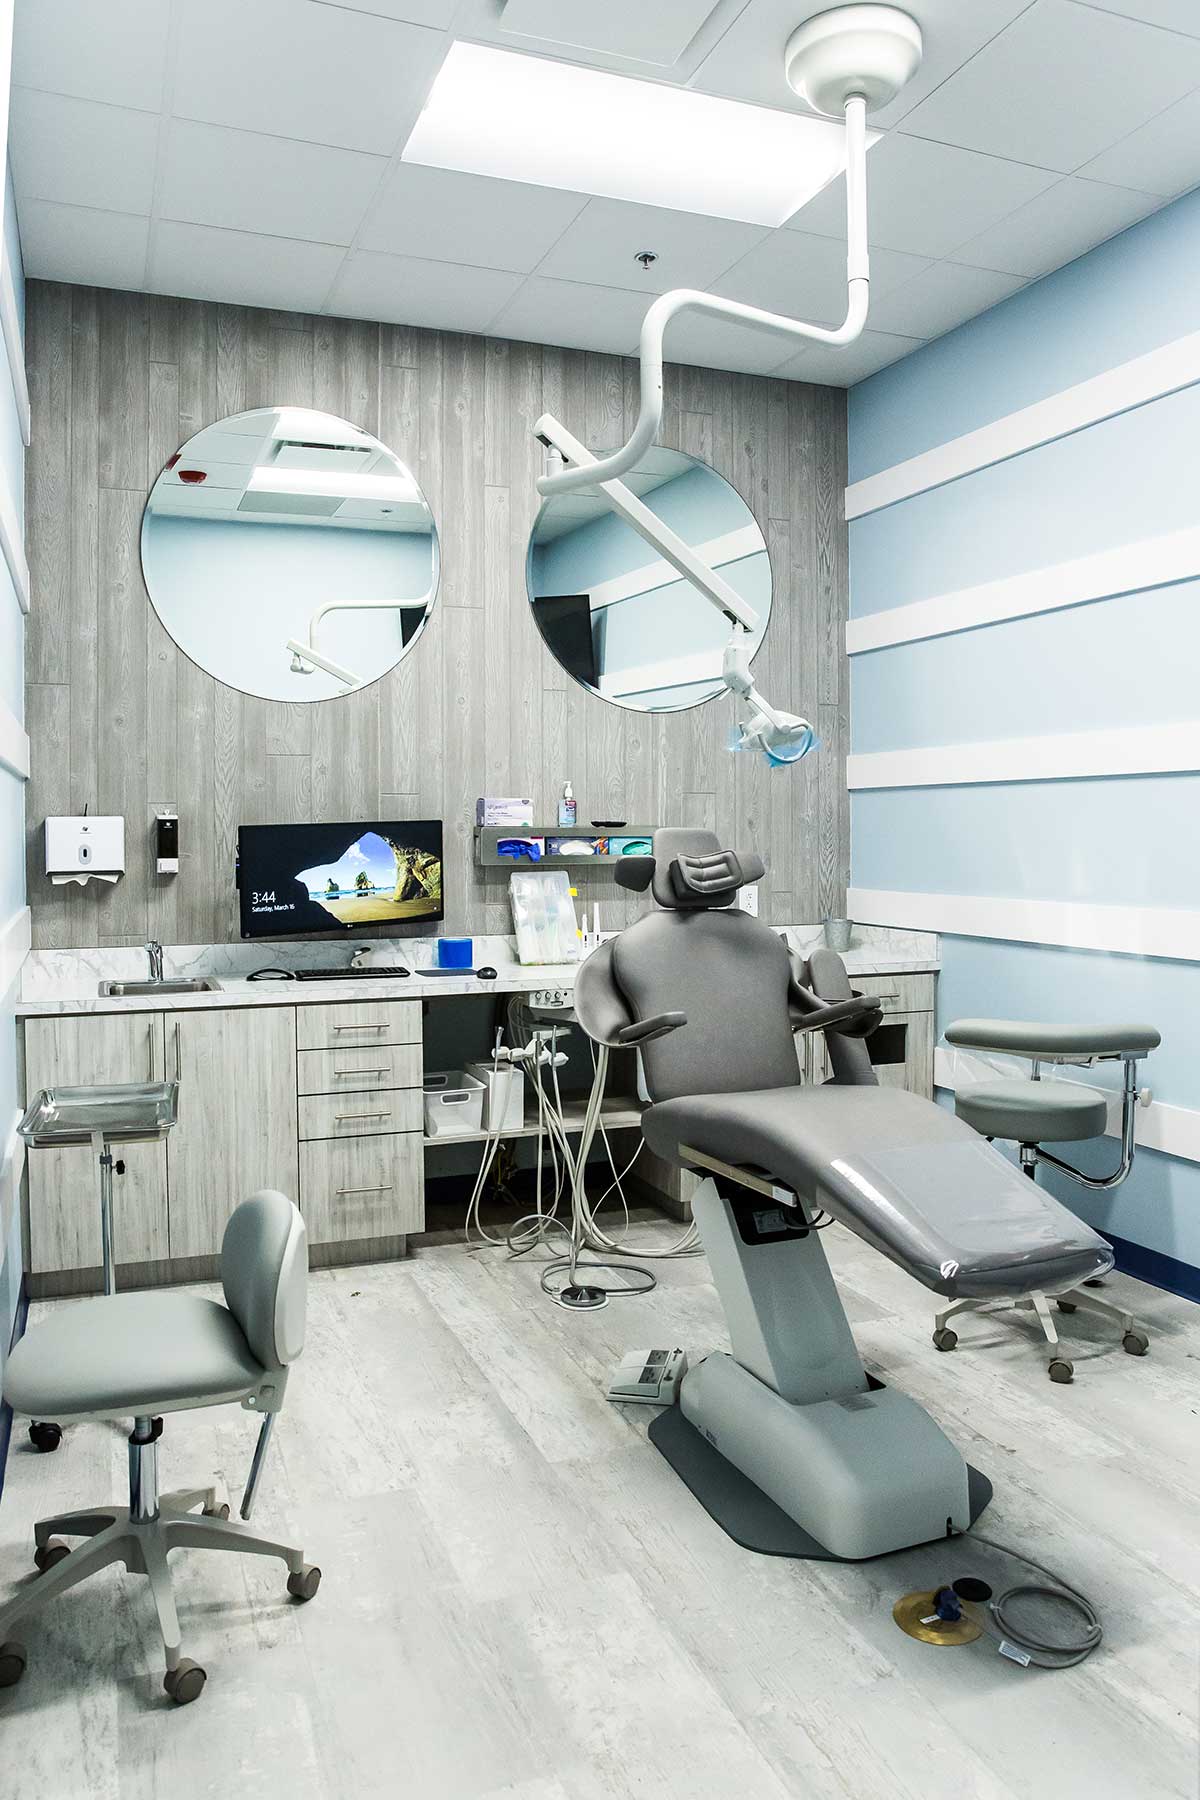 Dental implant operatory with dental chair and equipment